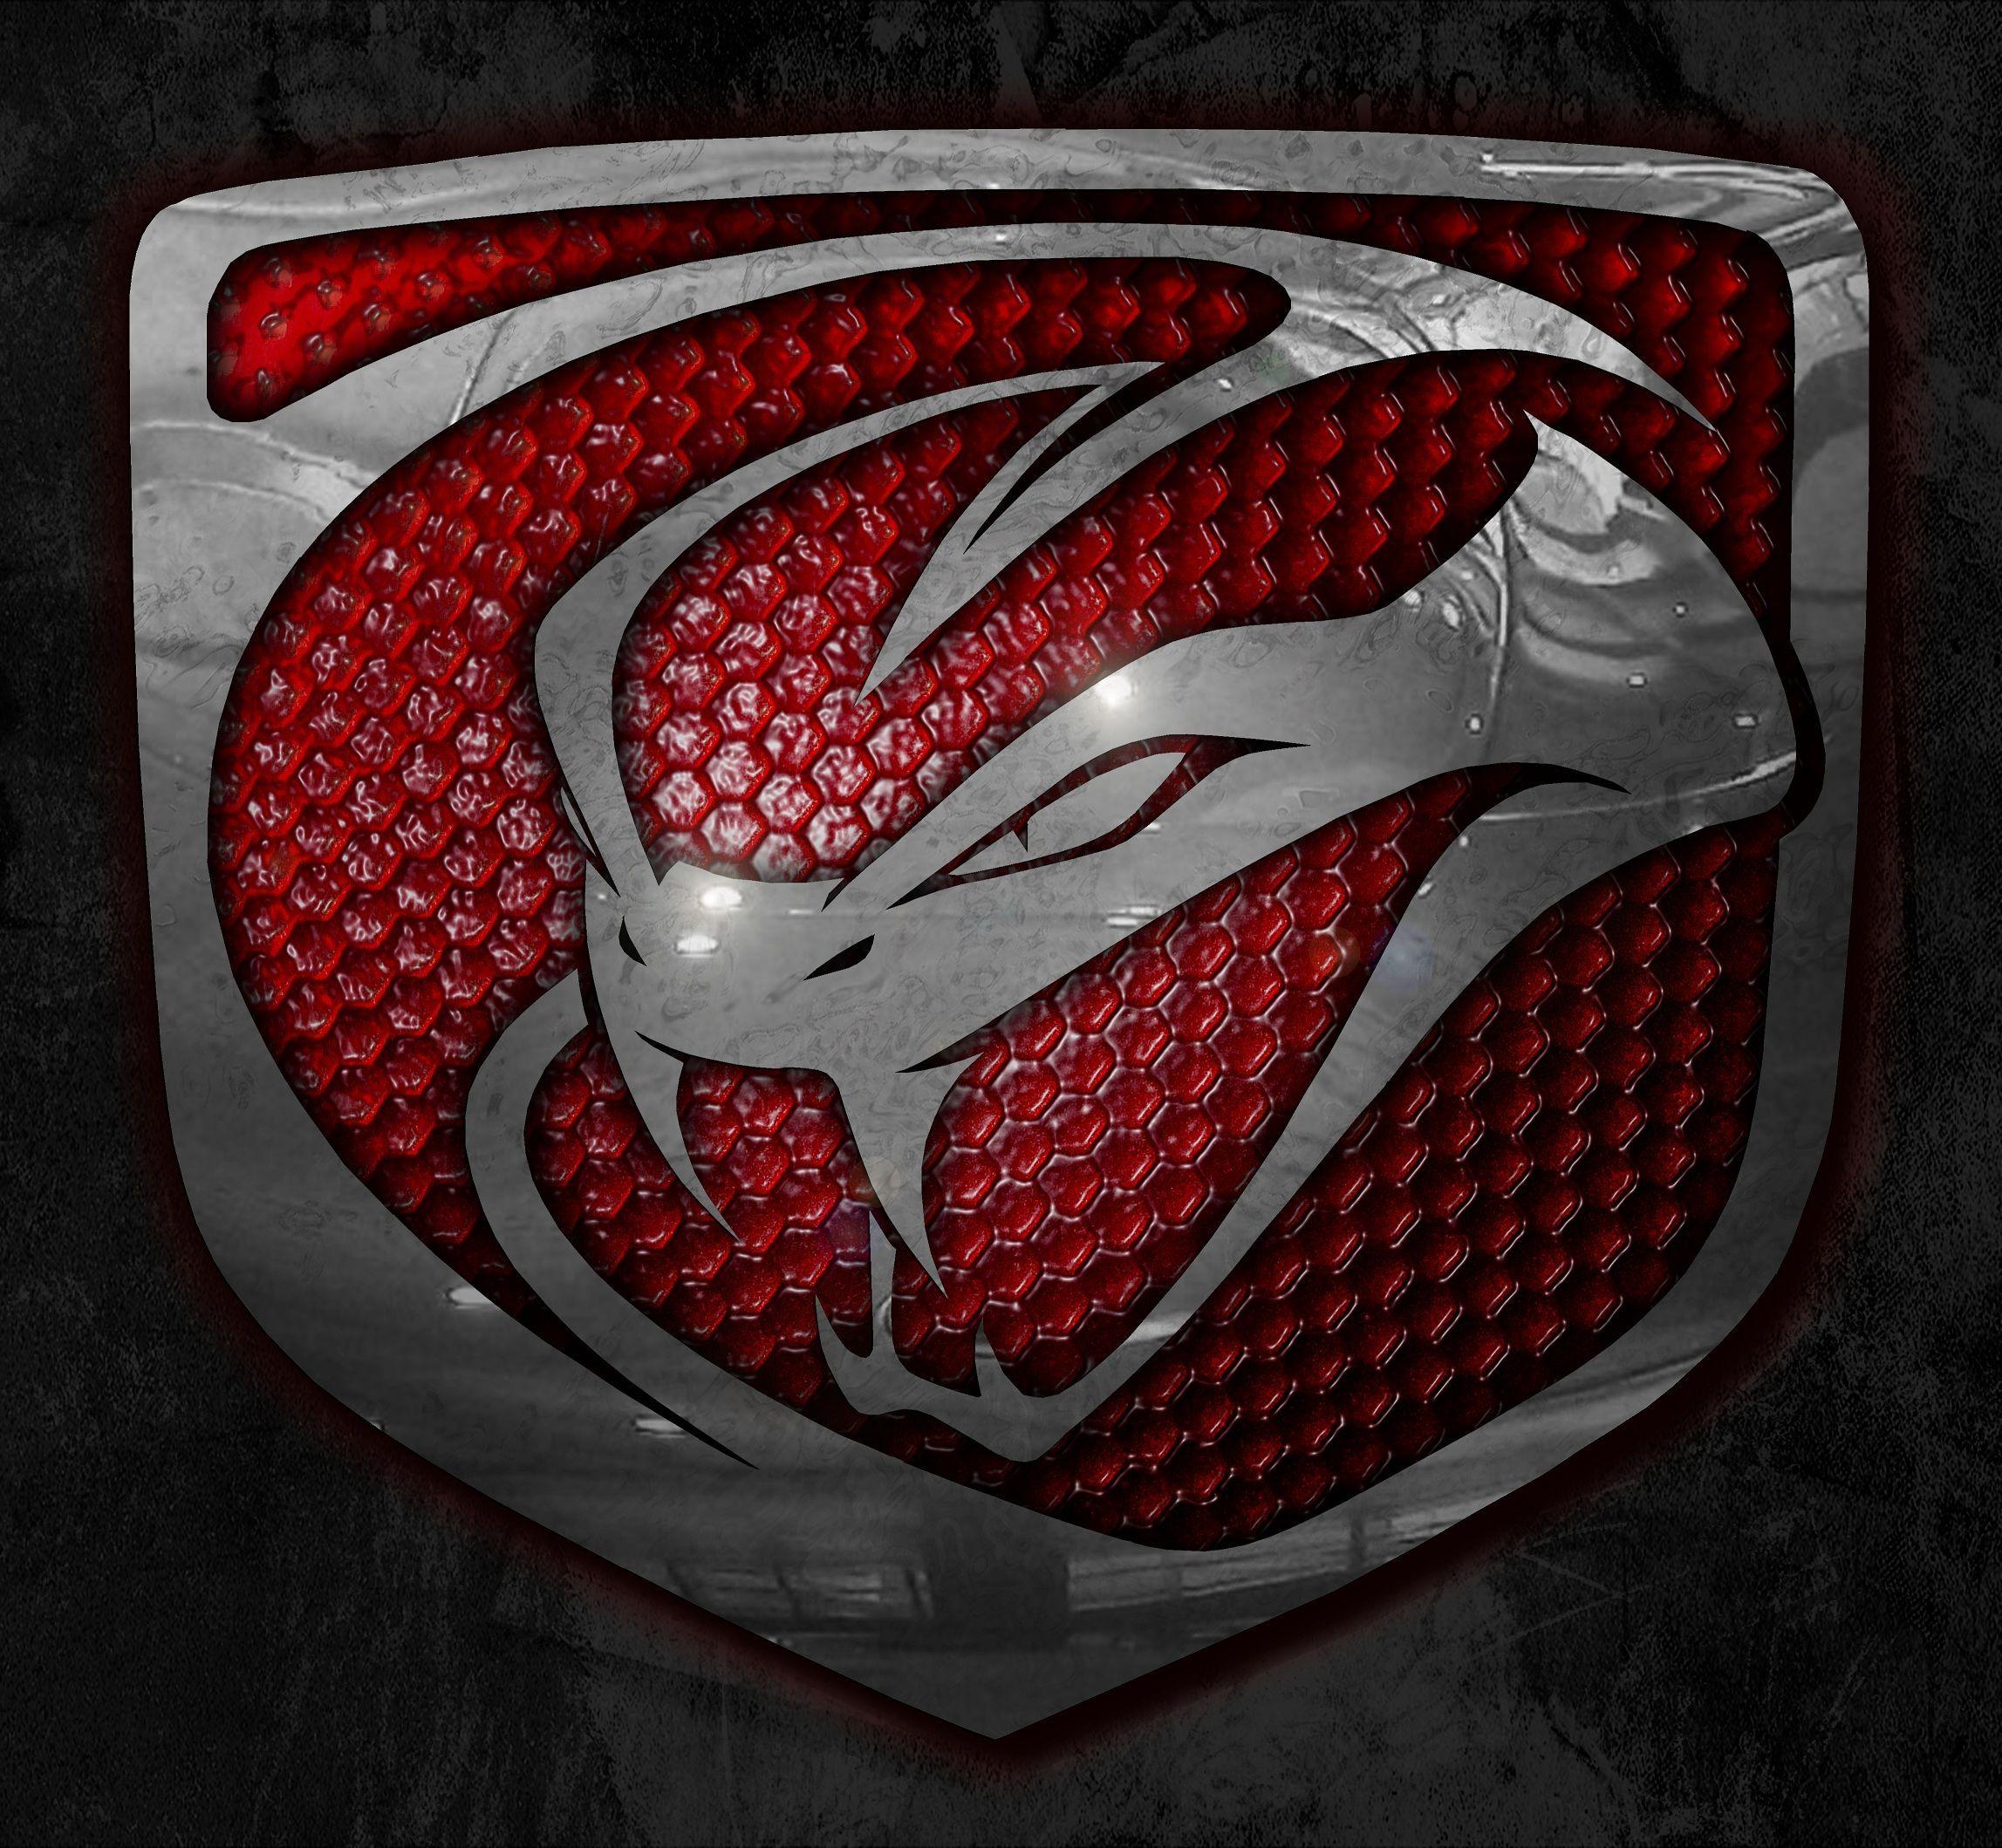 New Viper Logo - Get Your SRT Viper Before They Slither Away | Safford News....extra ...